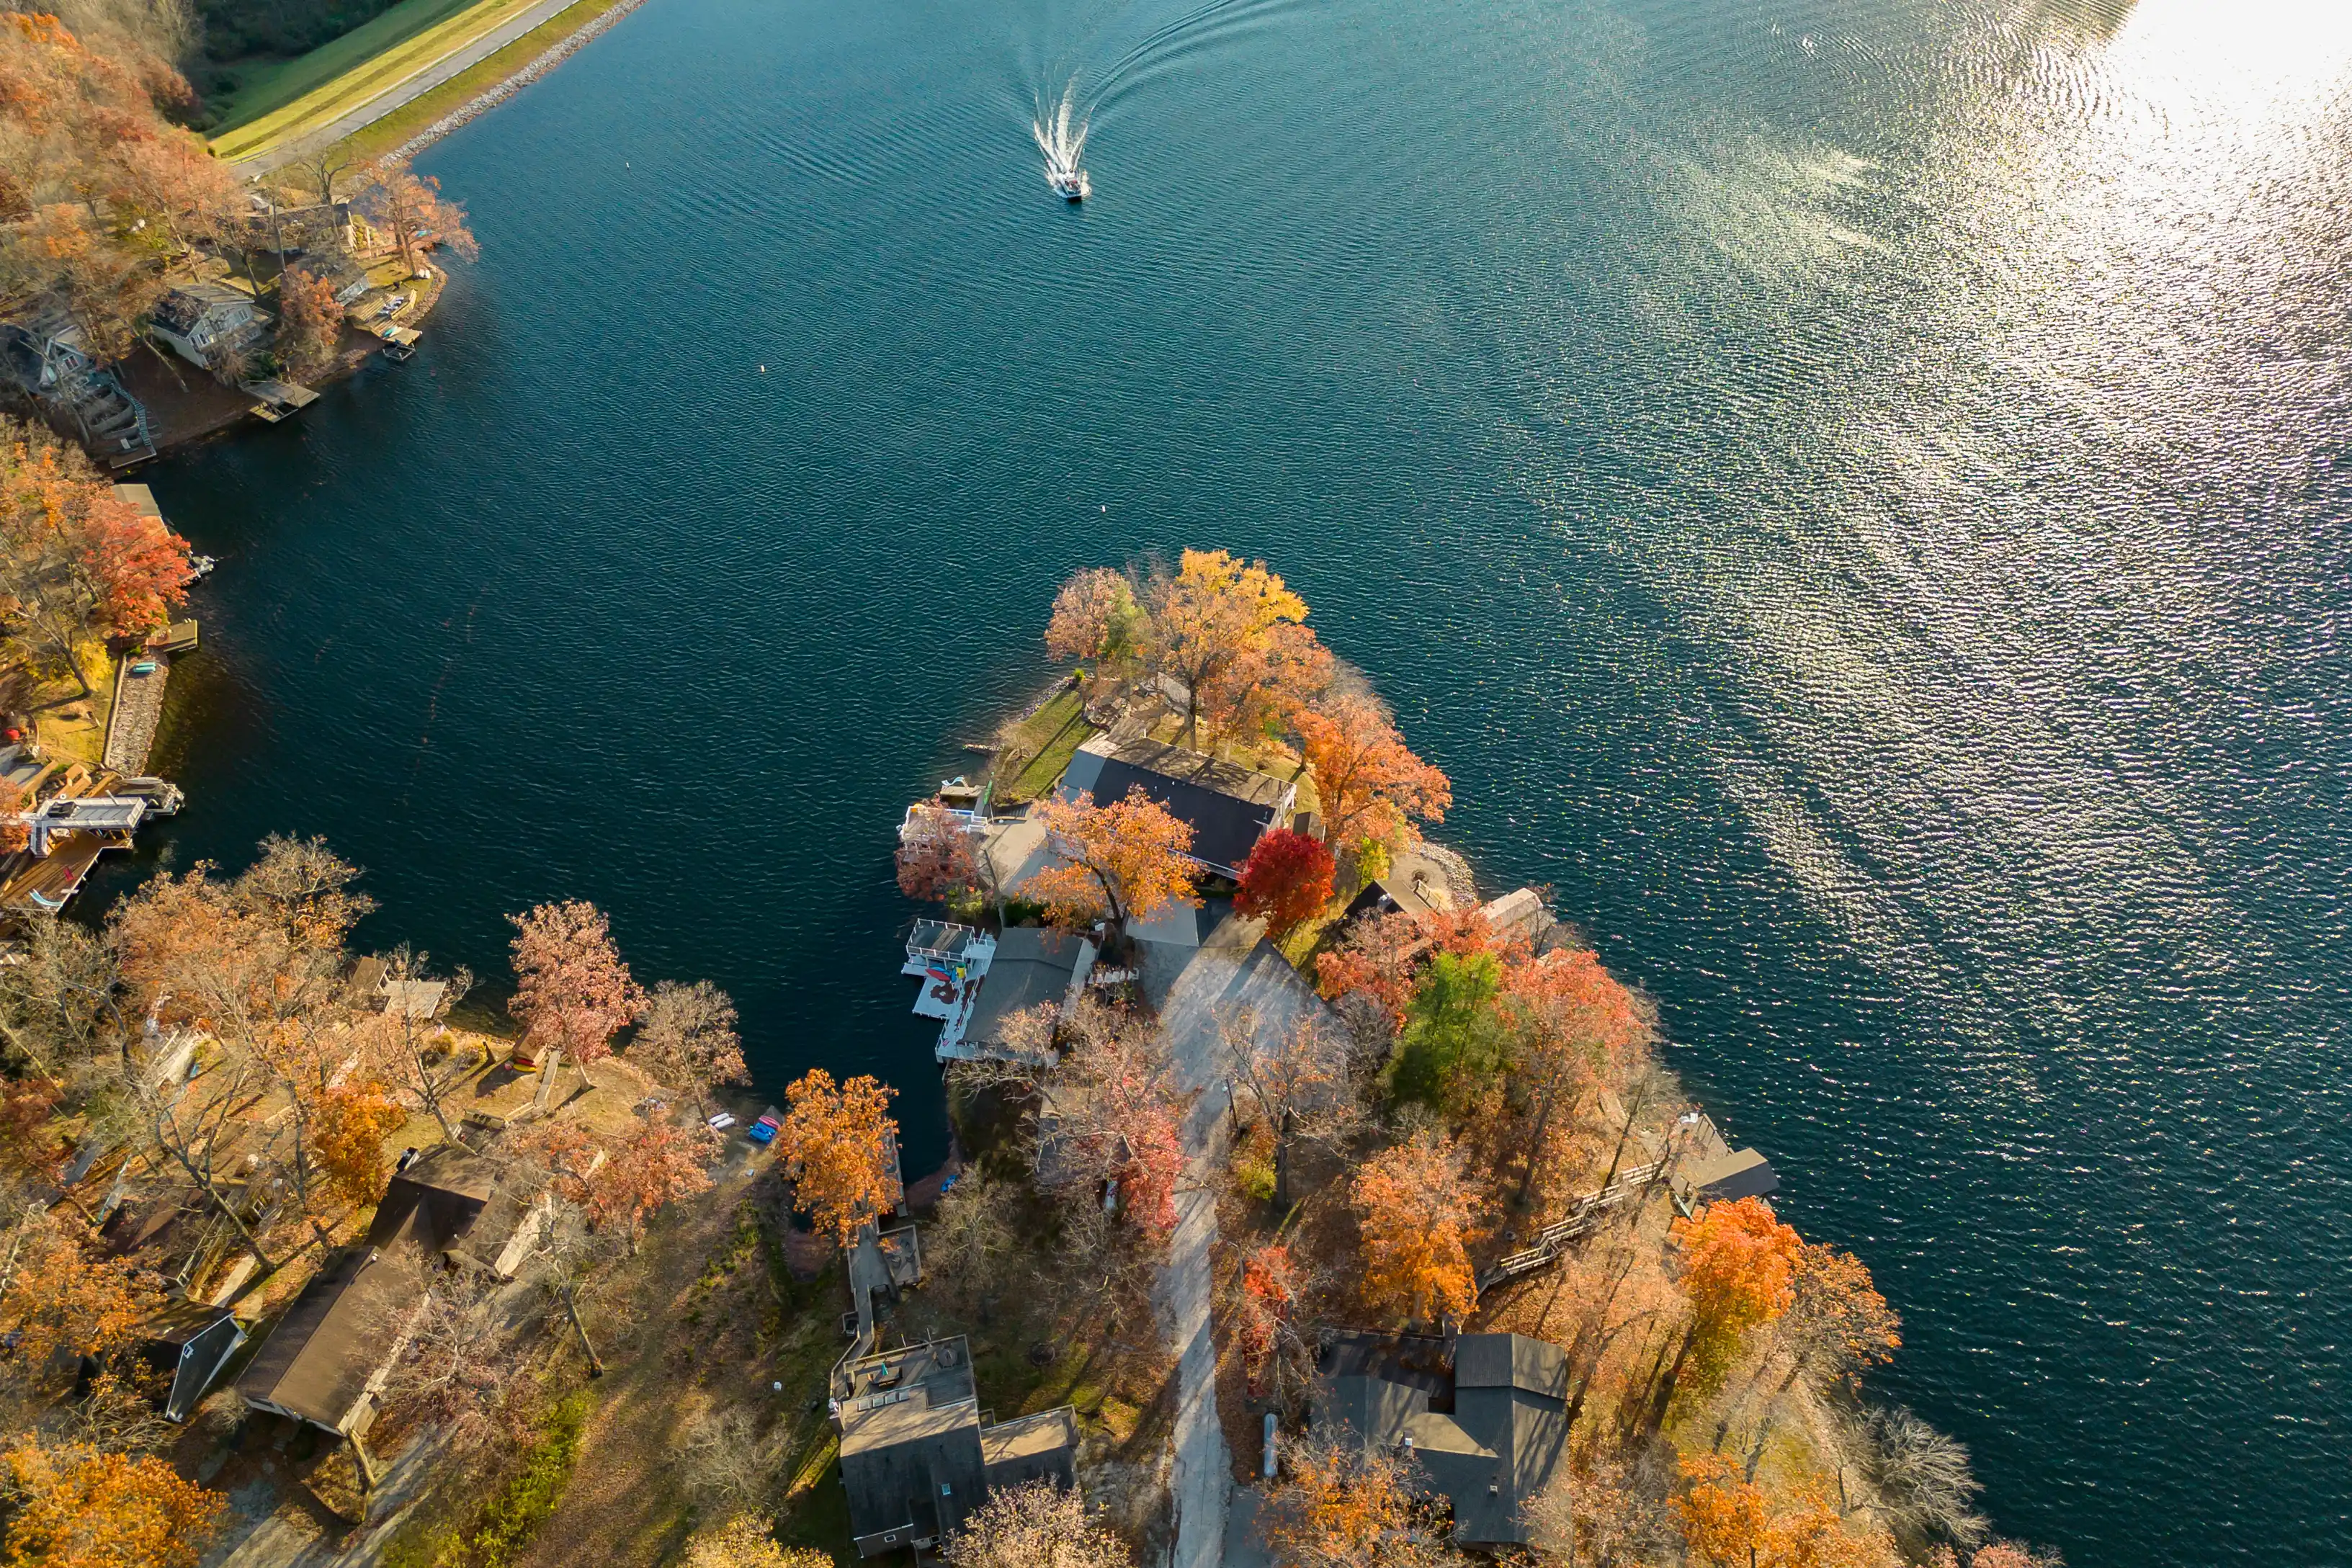 Aerial view of a forested peninsula with autumn foliage extending into a large lake, with boats and docks along the shoreline and a small speedboat creating ripples on the water.